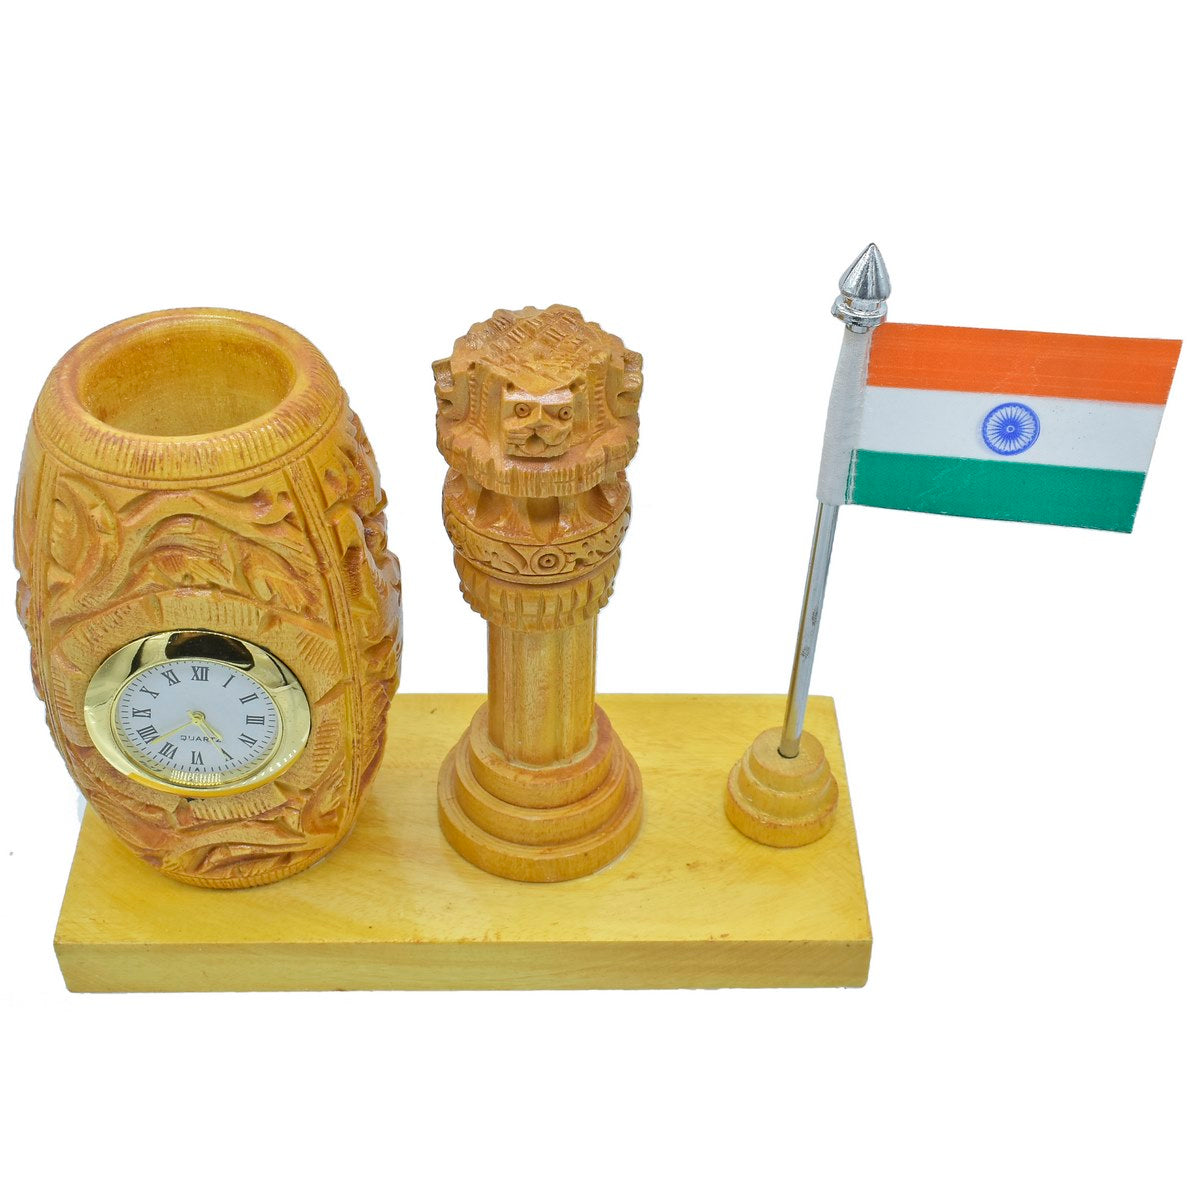 Wooden Pen Stand cum Clock with Ashoka Pillar and Indian Flag Table Top - For Corporate Gifting, Office, School, College Use, Independence Day, Republic Day Gift Item